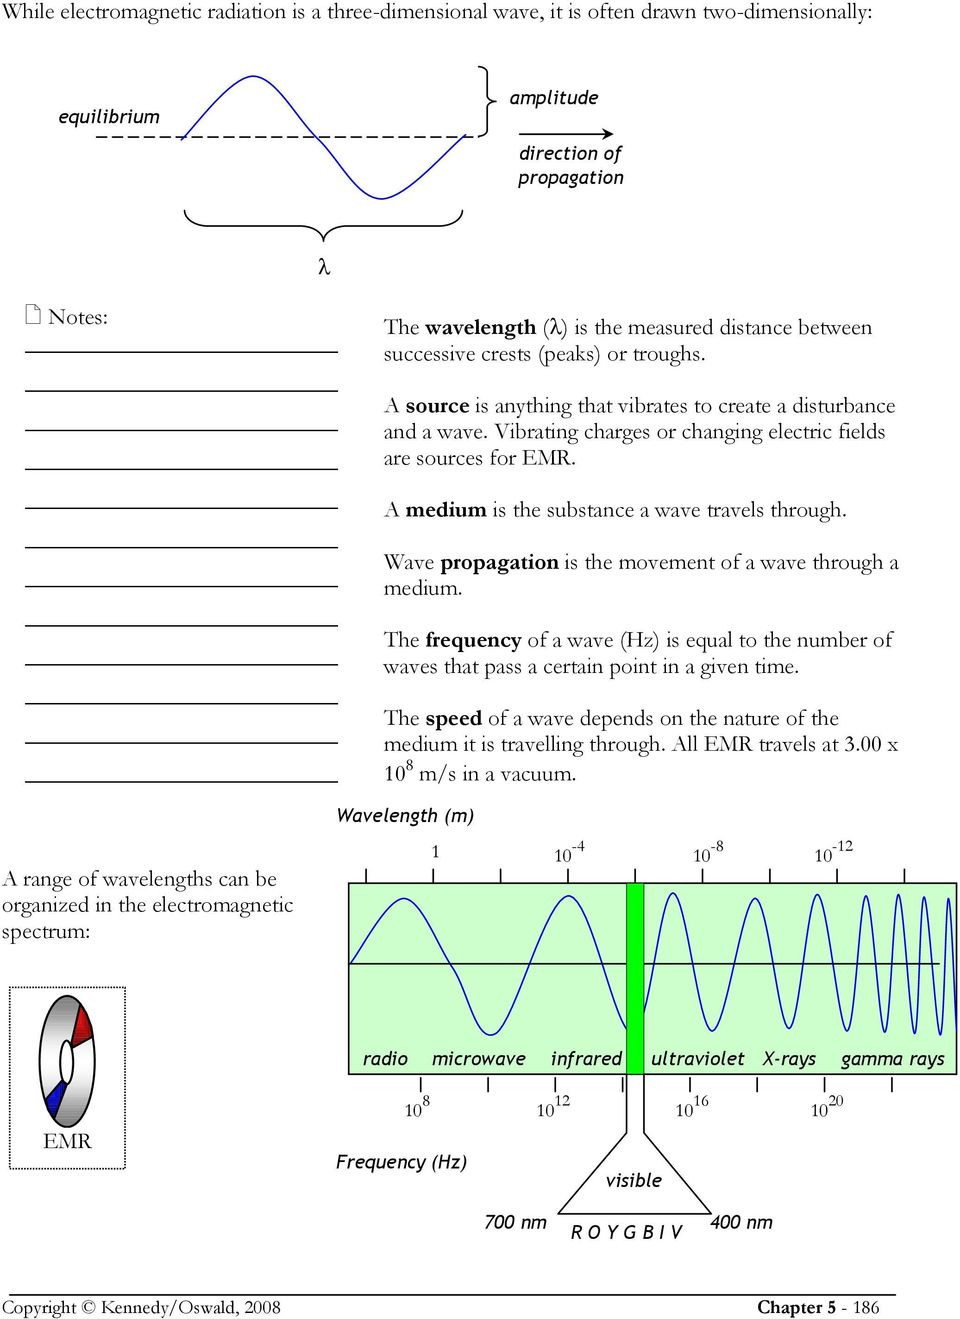 Electromagnetic Spectrum Worksheet High School Introduction In Physics Light is Referred to as